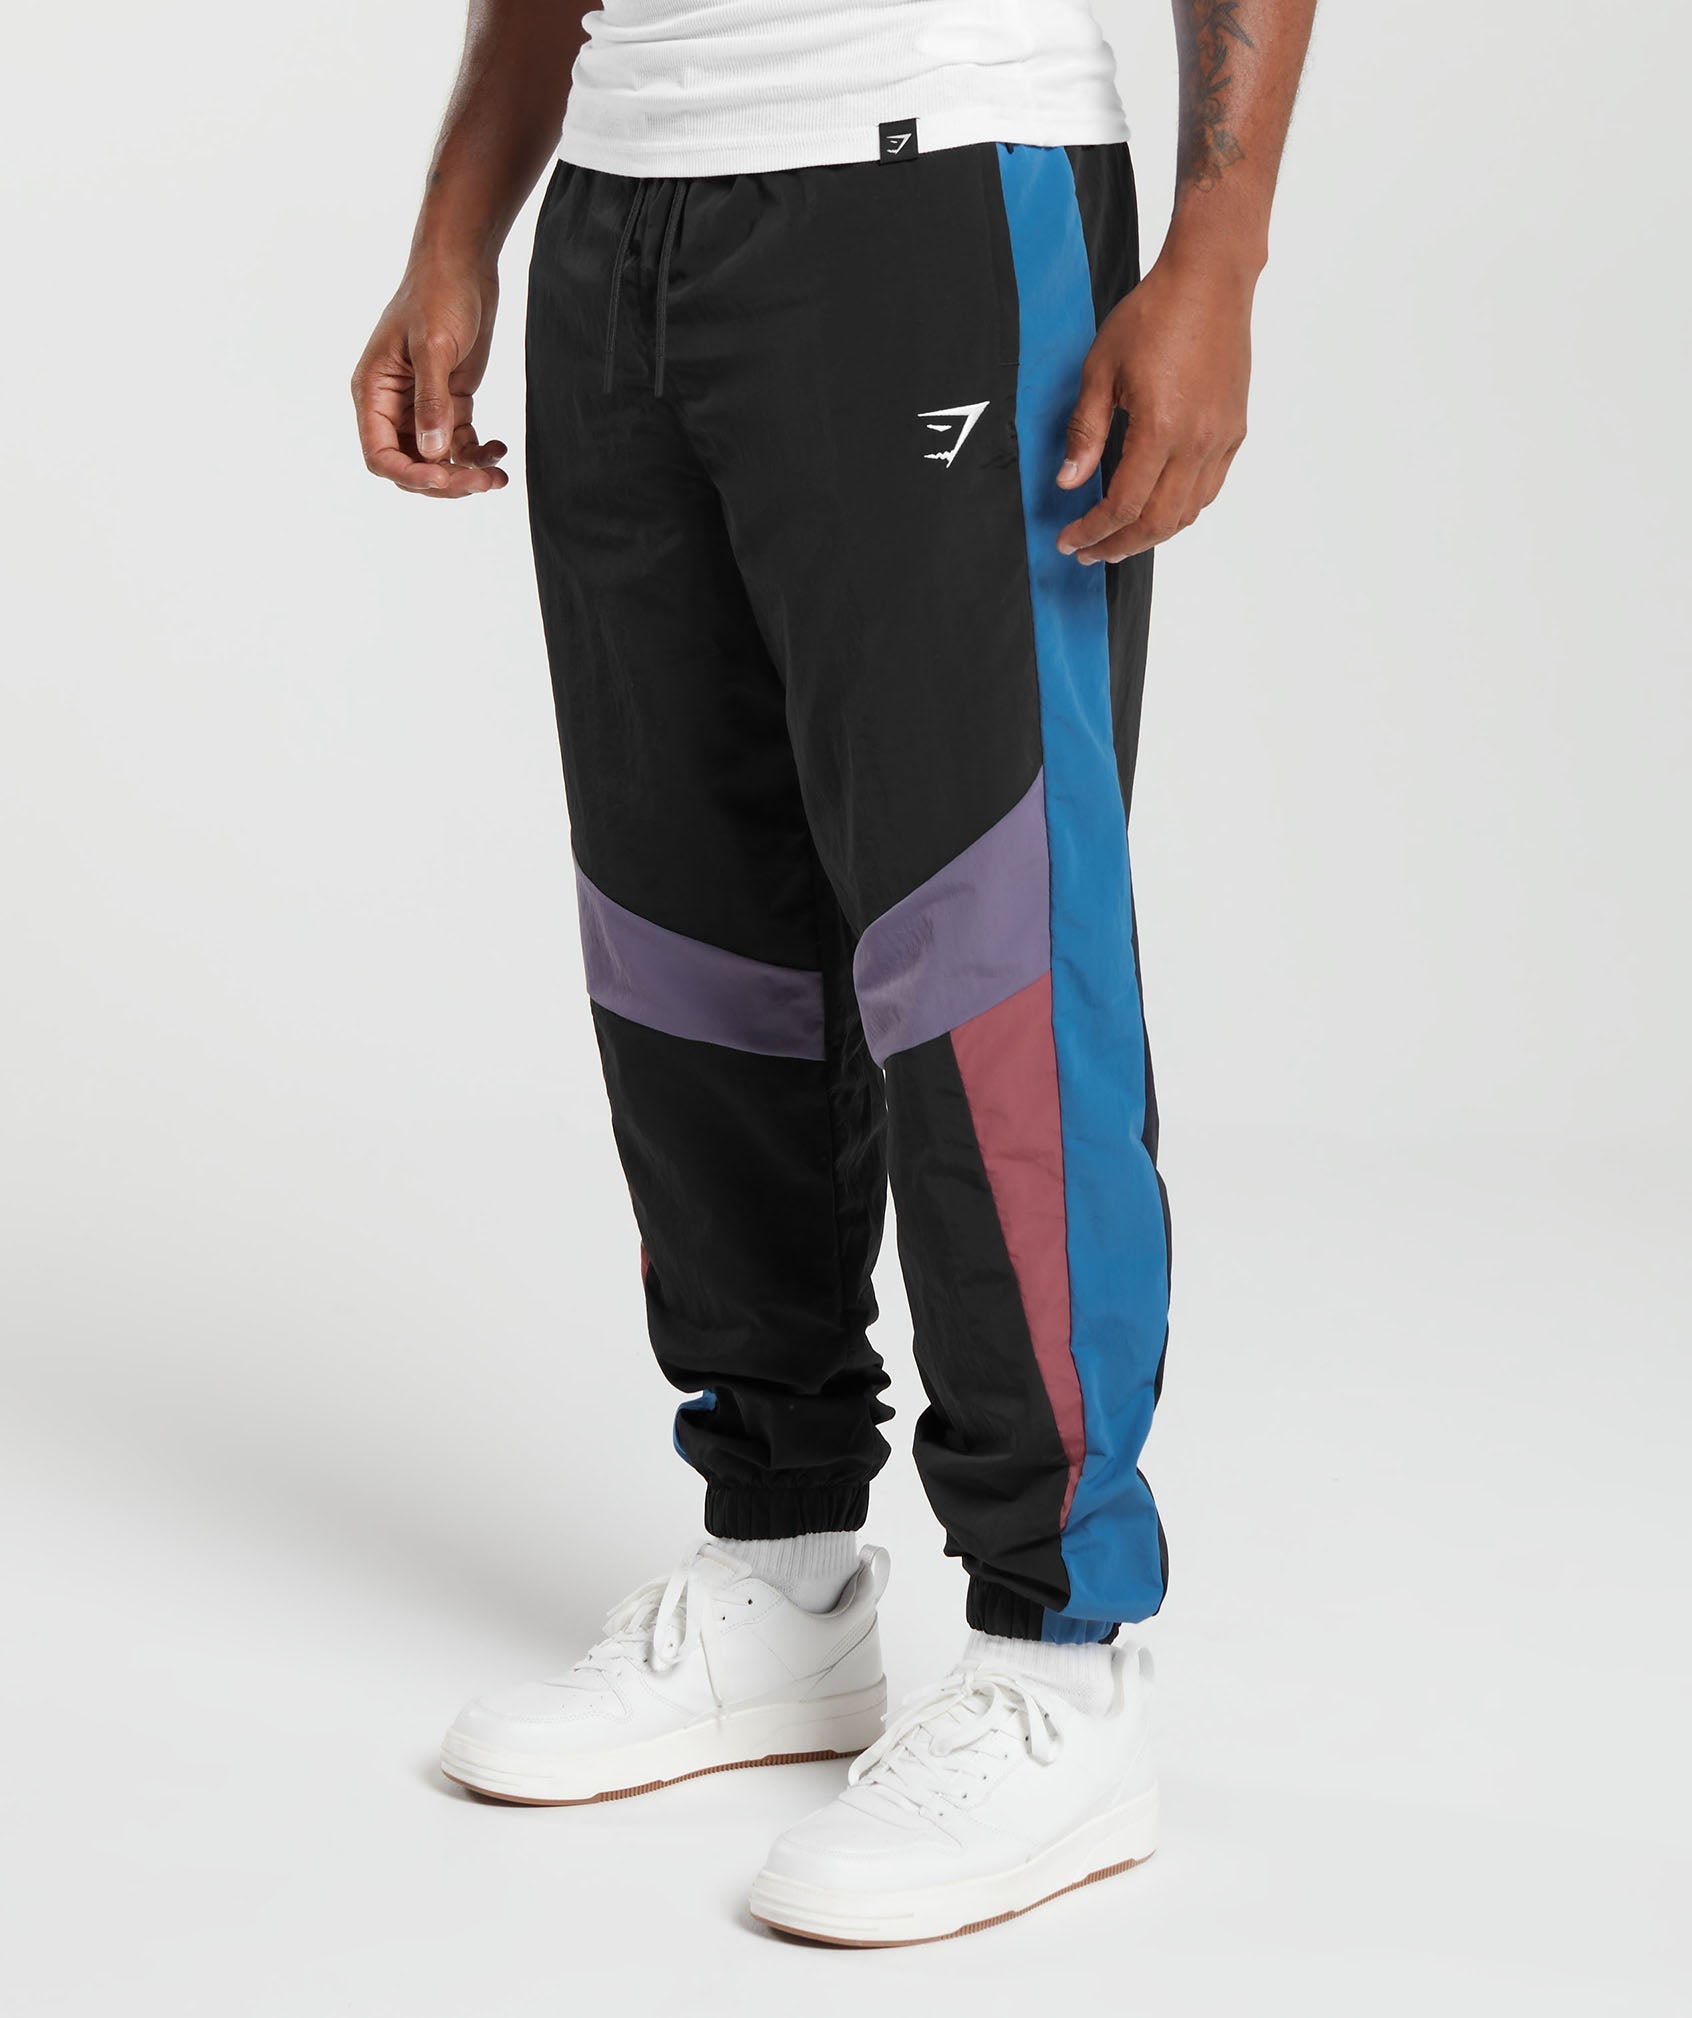 Gymshark Joggers - $35 (36% Off Retail) - From hope